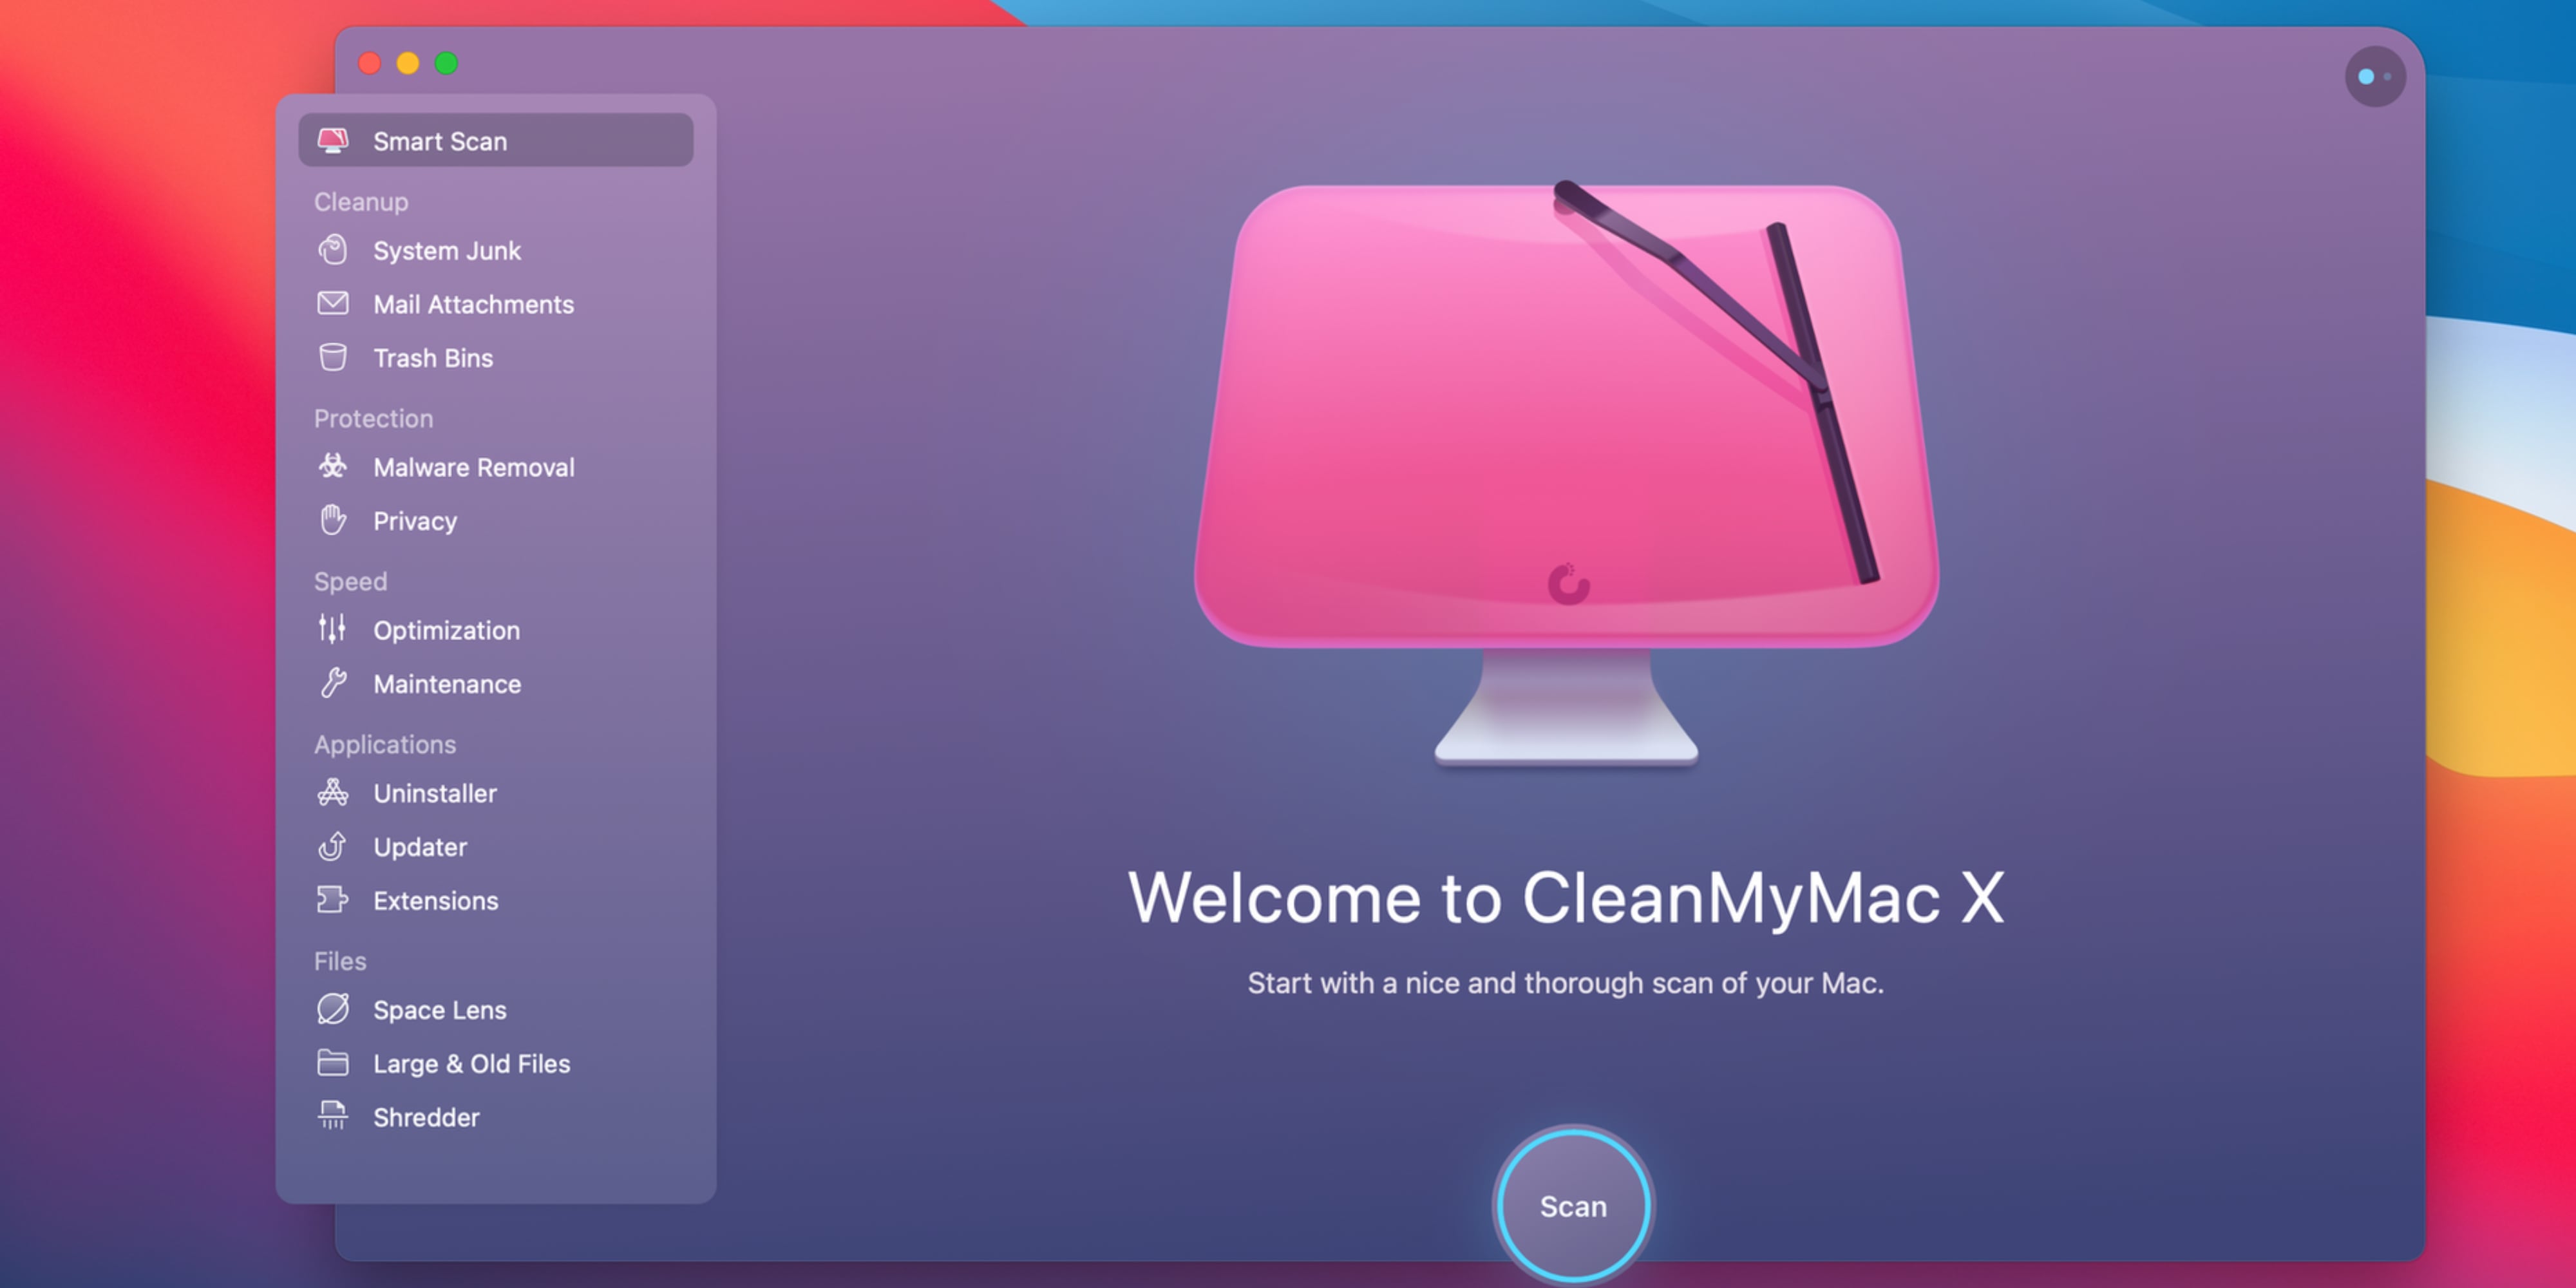 advanced mac cleaner removal